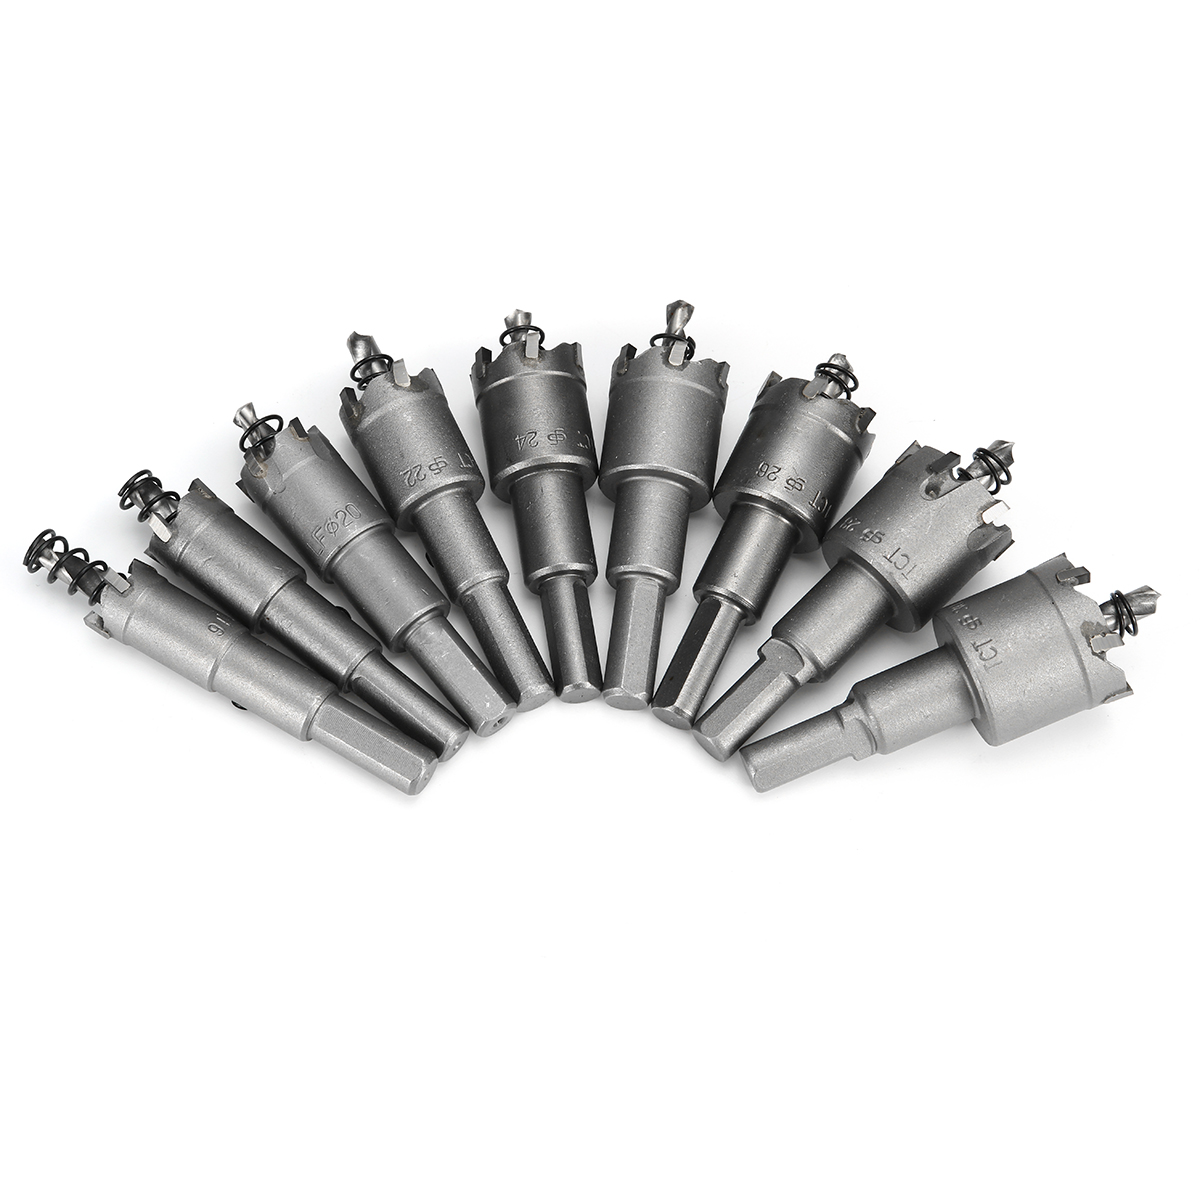 16mm-to-30mm-How-Saw-Cutter-Alloy-Hole-Opener-Drill-Bits-1679223-9